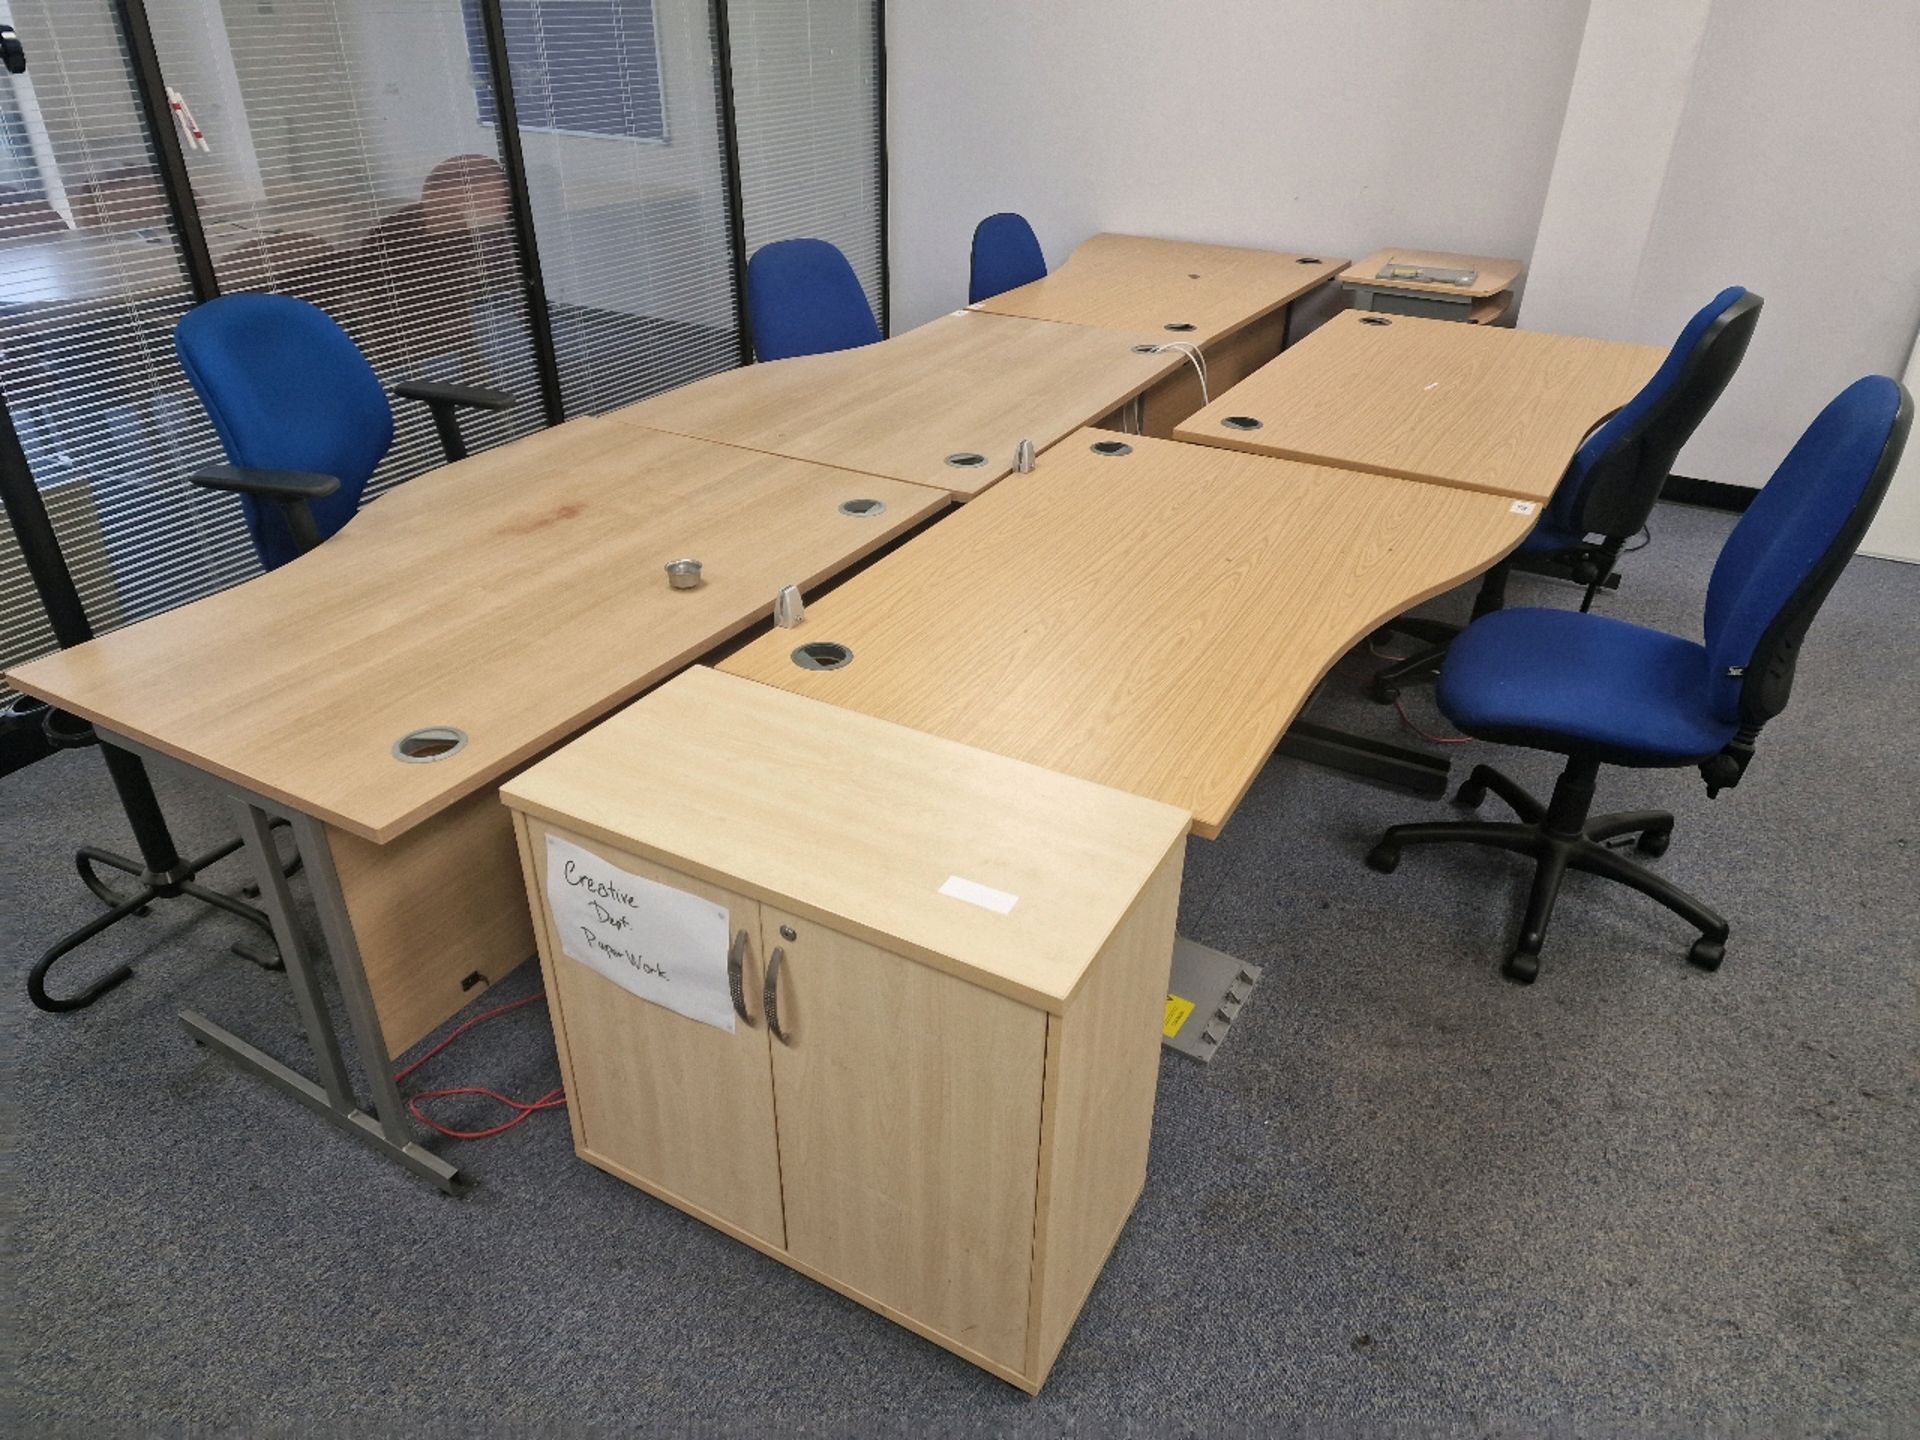 Wooden Effect Office Desks x5 With Office Chairs x5